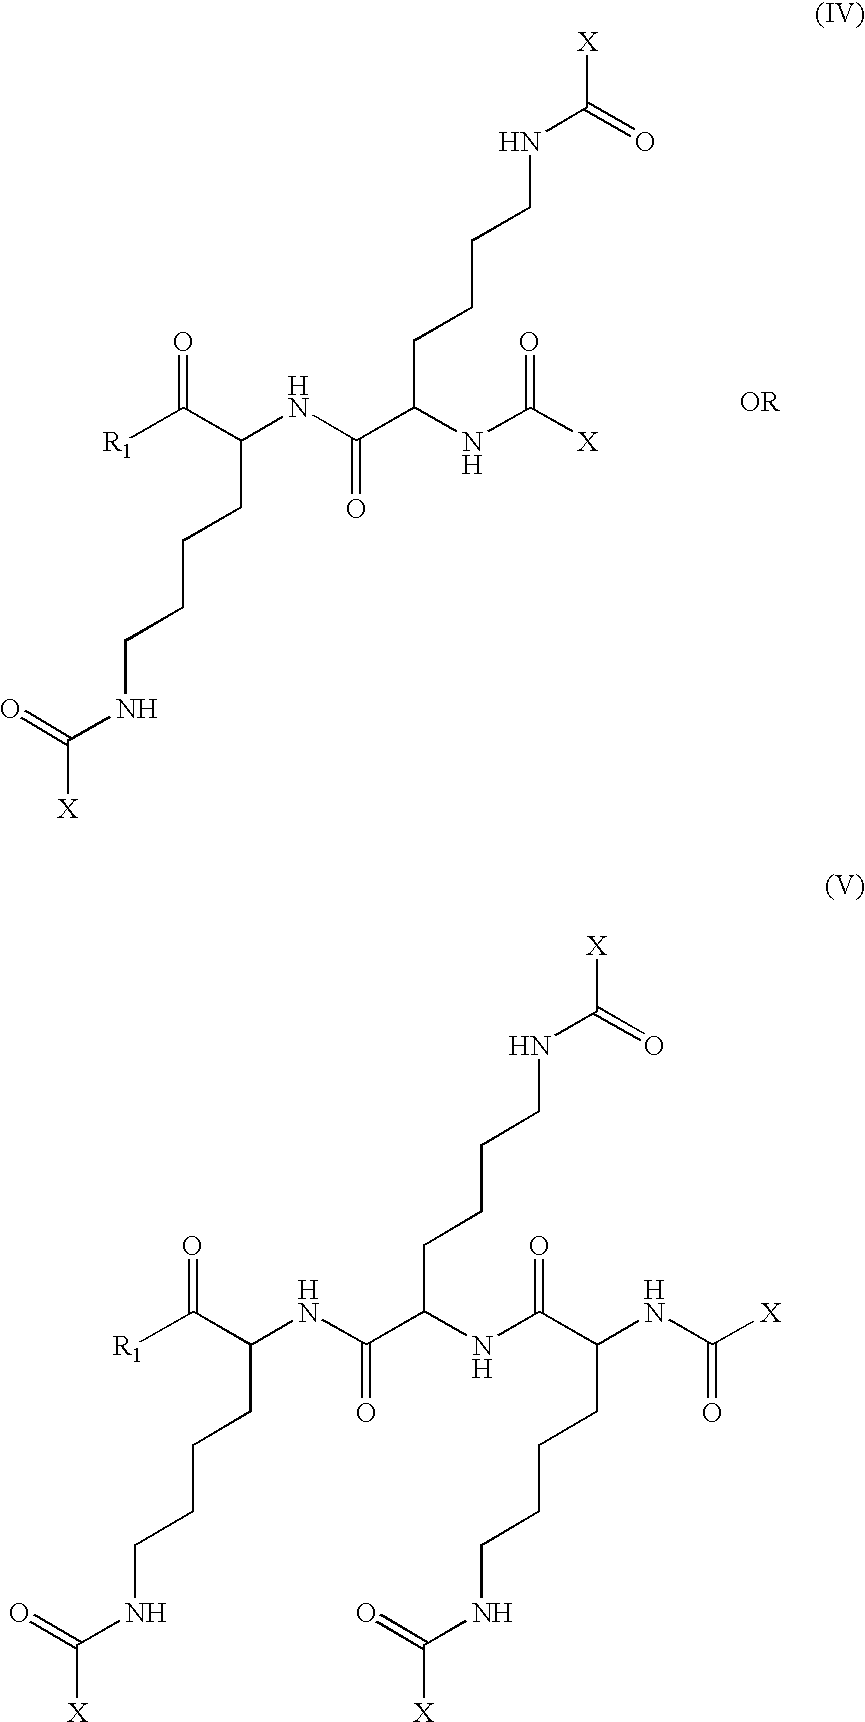 Apolipoprotein A-I agonist compounds